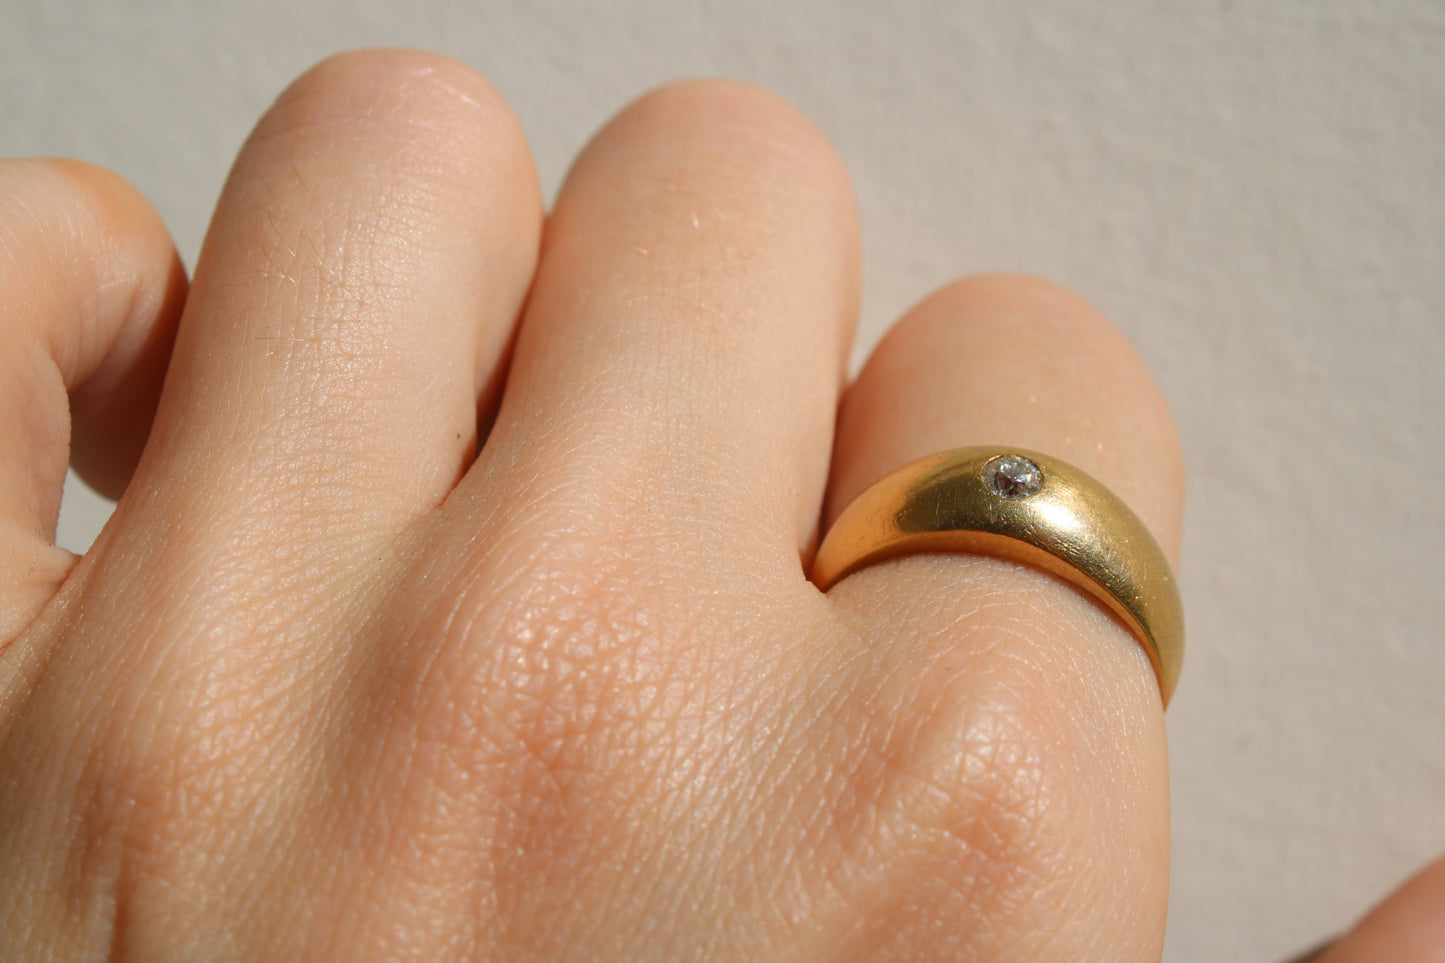 18k Solid Gold Ring with Flush Set Diamond - dunia jewelry - vintage gold - recycled gold